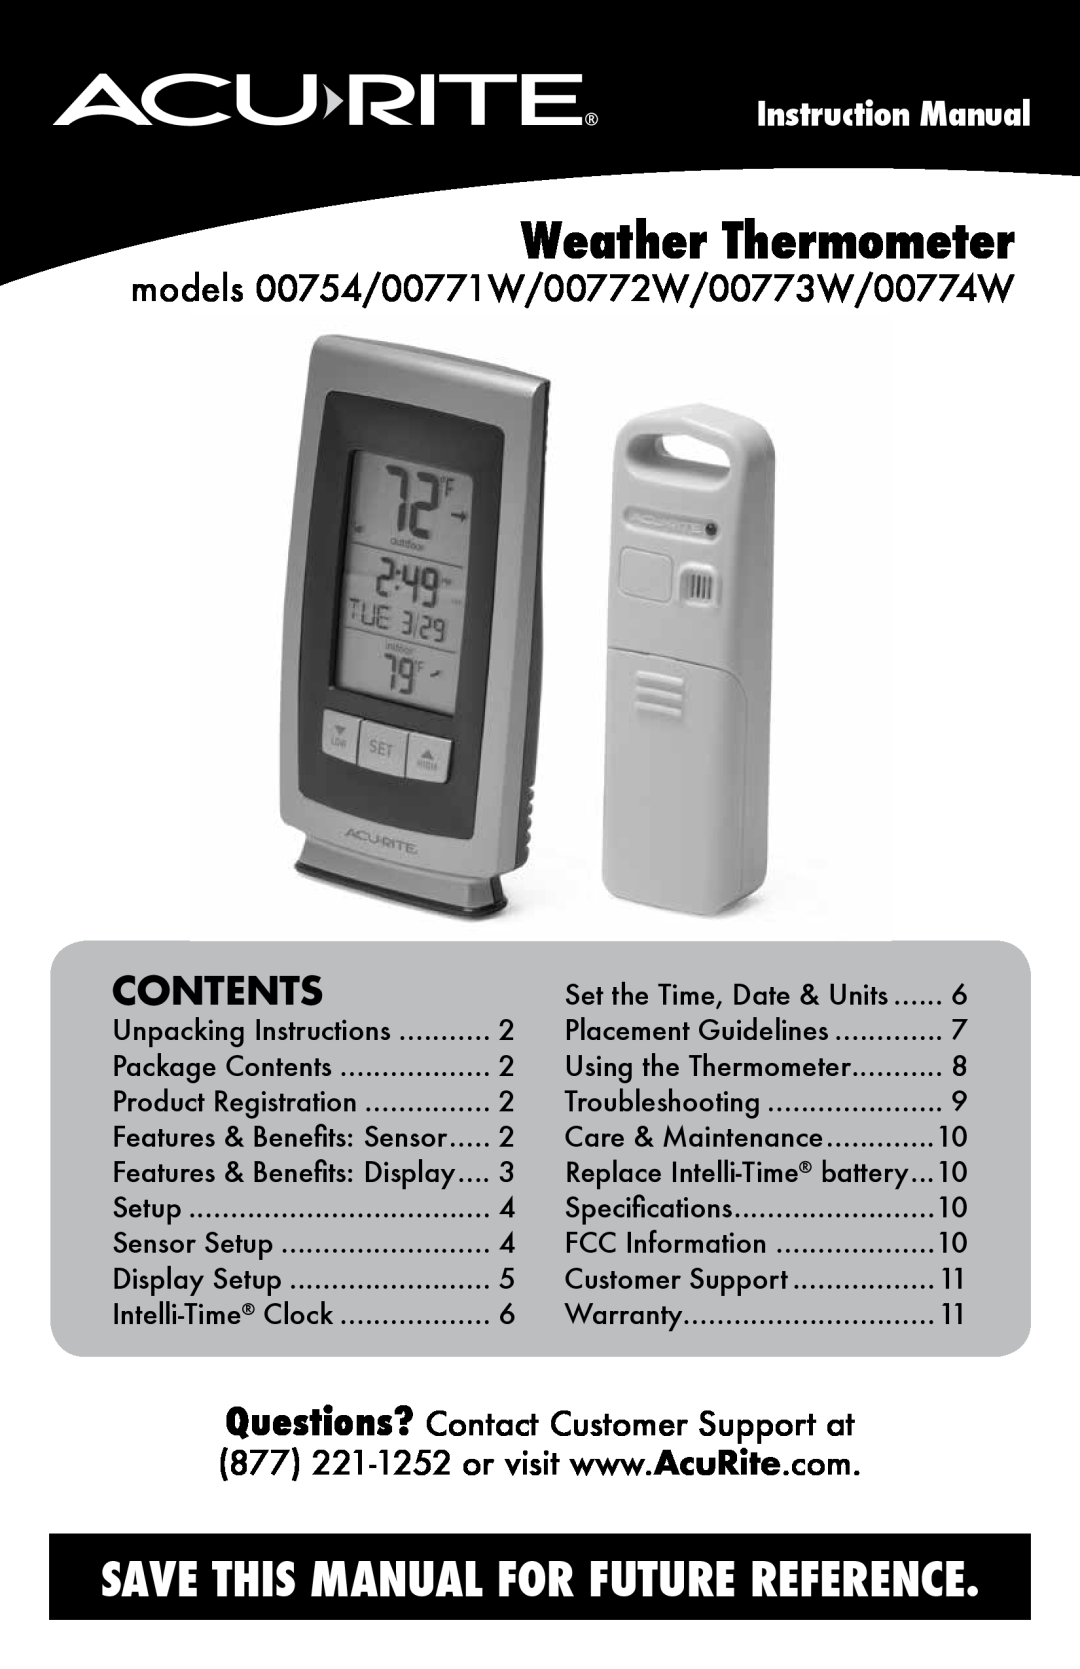 Acu-Rite instruction manual Contents, models 00754/00771W/00772W/00773W/00774W, Weather Thermometer 